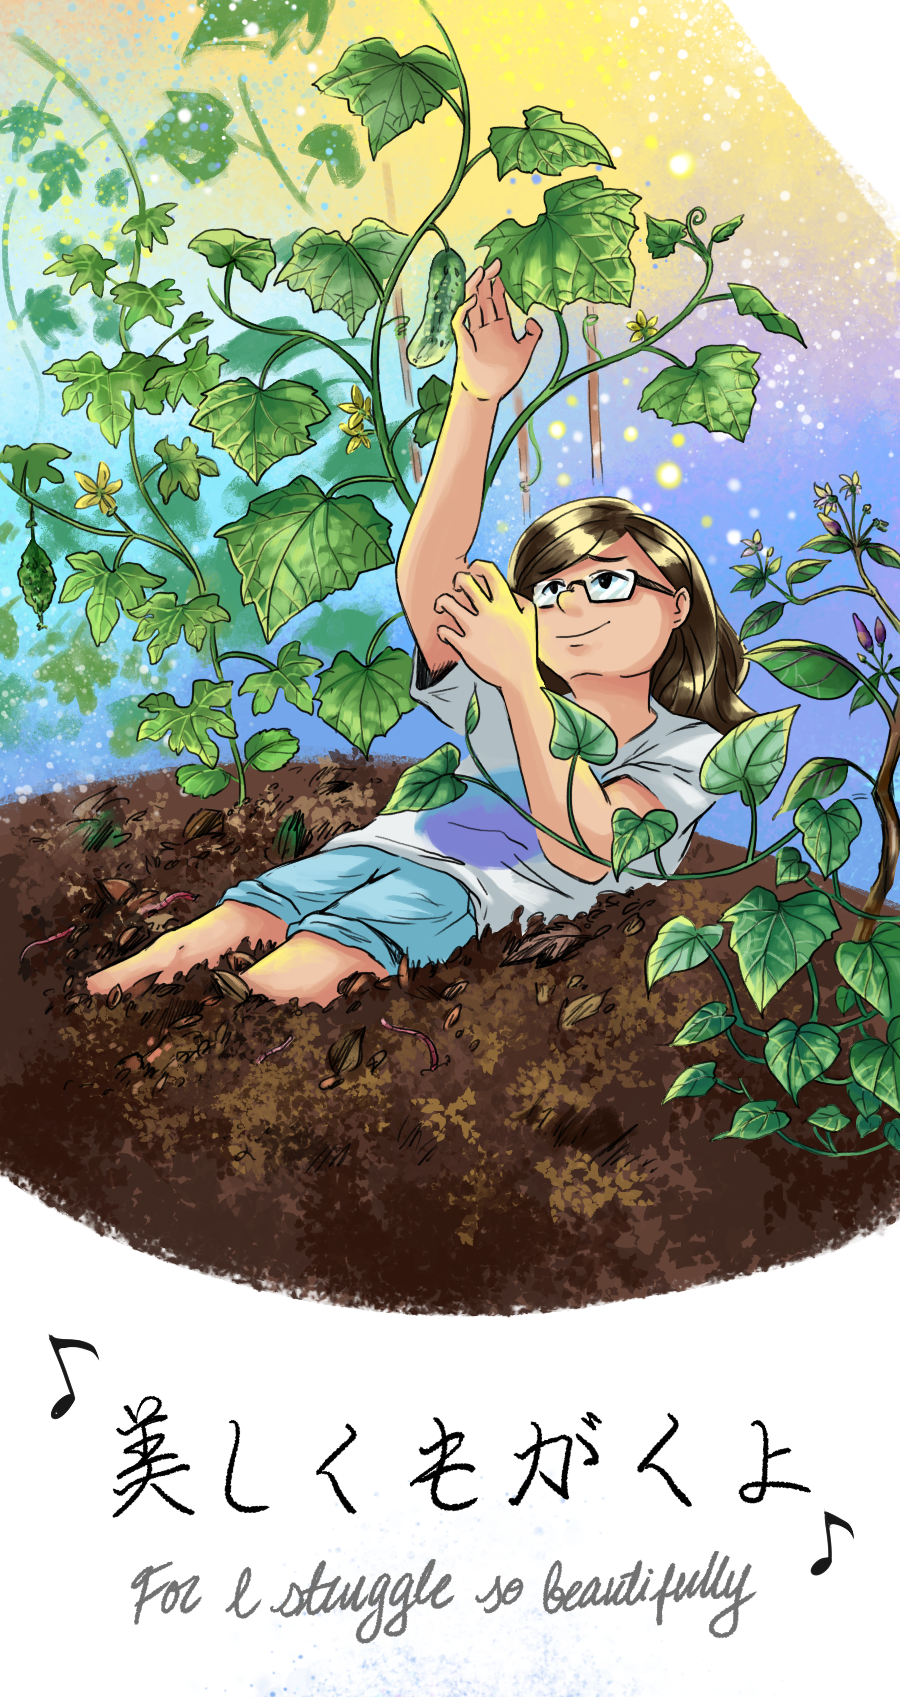 One of the final scenes of my webcomic Refu(SE/SL/GE), showing me sitting half-buried in soil/compost, admiring the cucumber vines growing above me, surrounded by bittergourd, chilli, brinjal, and sweet potato plants, and the living, breathing soil.